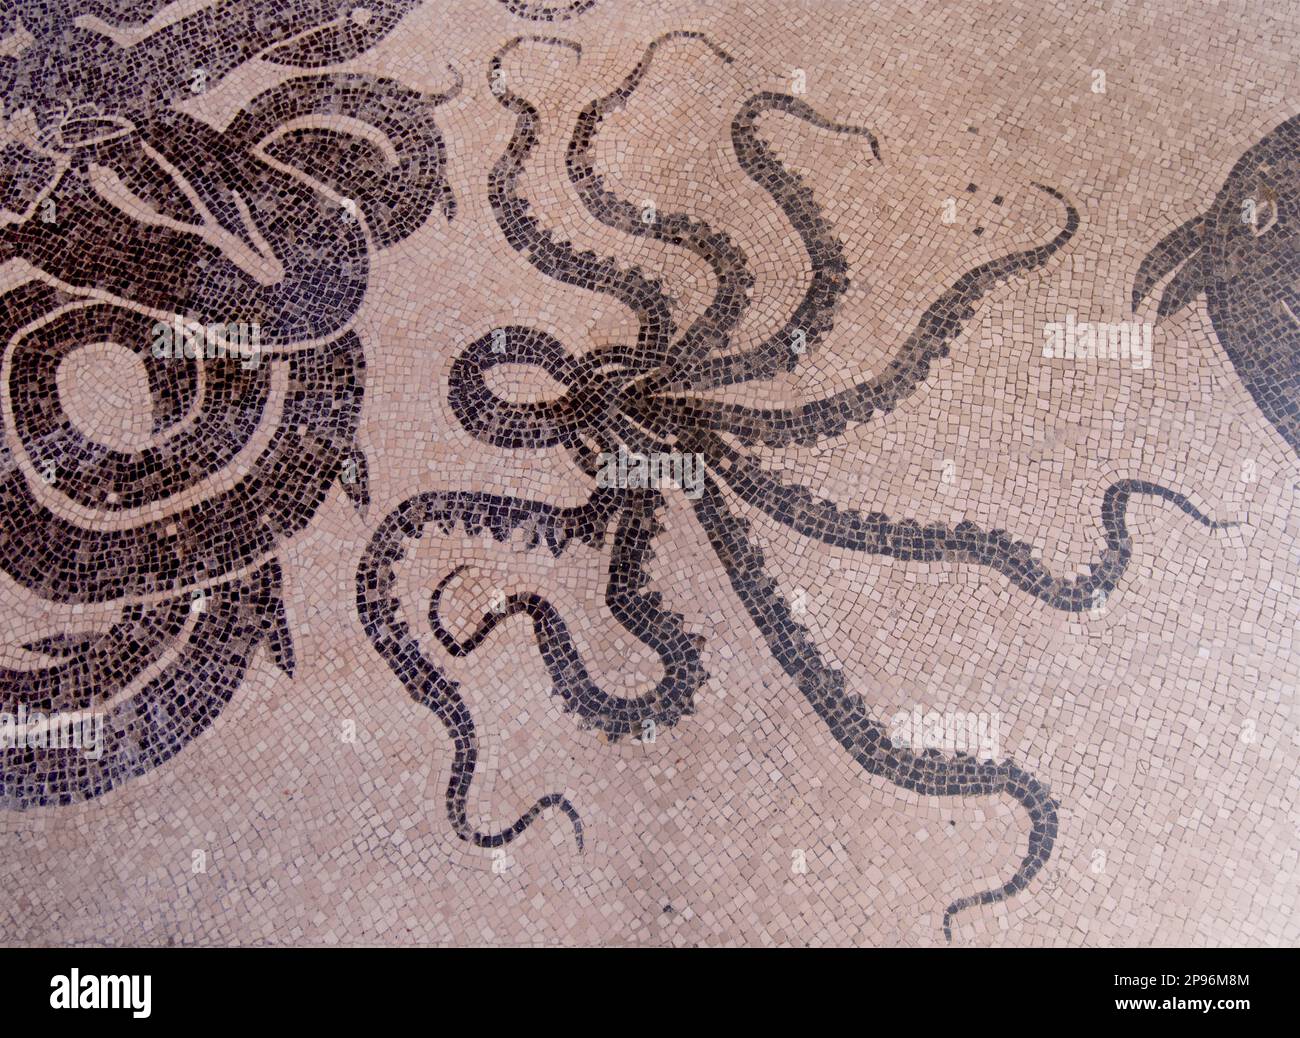 Black and white mosaic on the floor of the Women's baths. Octopus. Herculaneum uncovered. Herculaneum was buried under volcanic ash and pumice in the eruption of Mount Vesuvius in AD 79. Ercolano, Campania, Italy Stock Photo